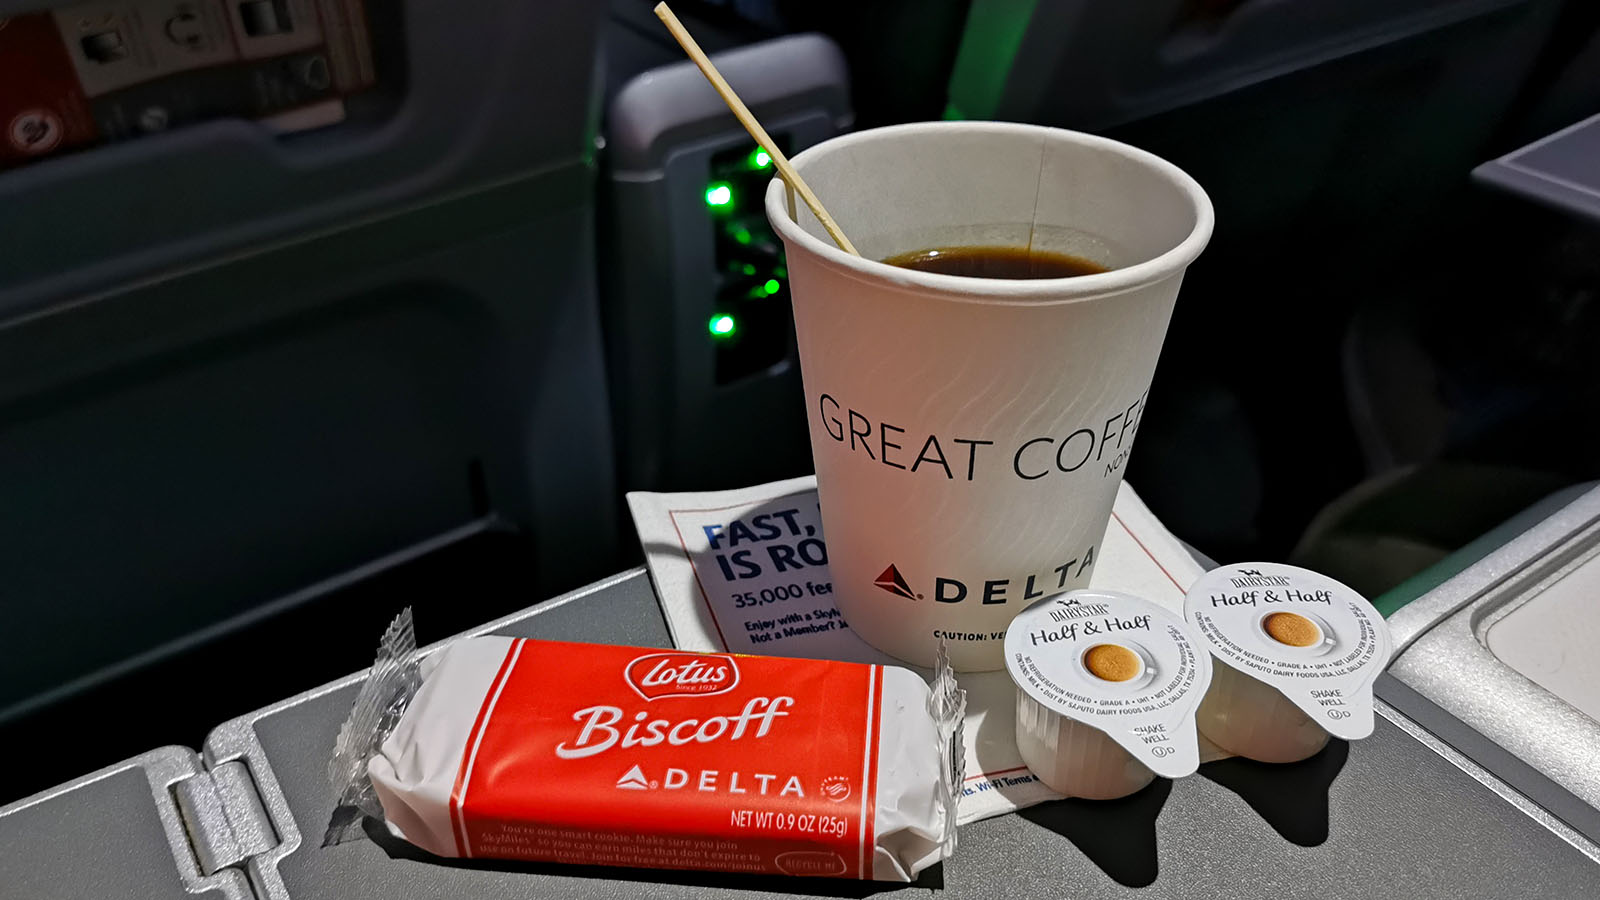 Brewed java and snacks in Delta A330-900neo Comfort+